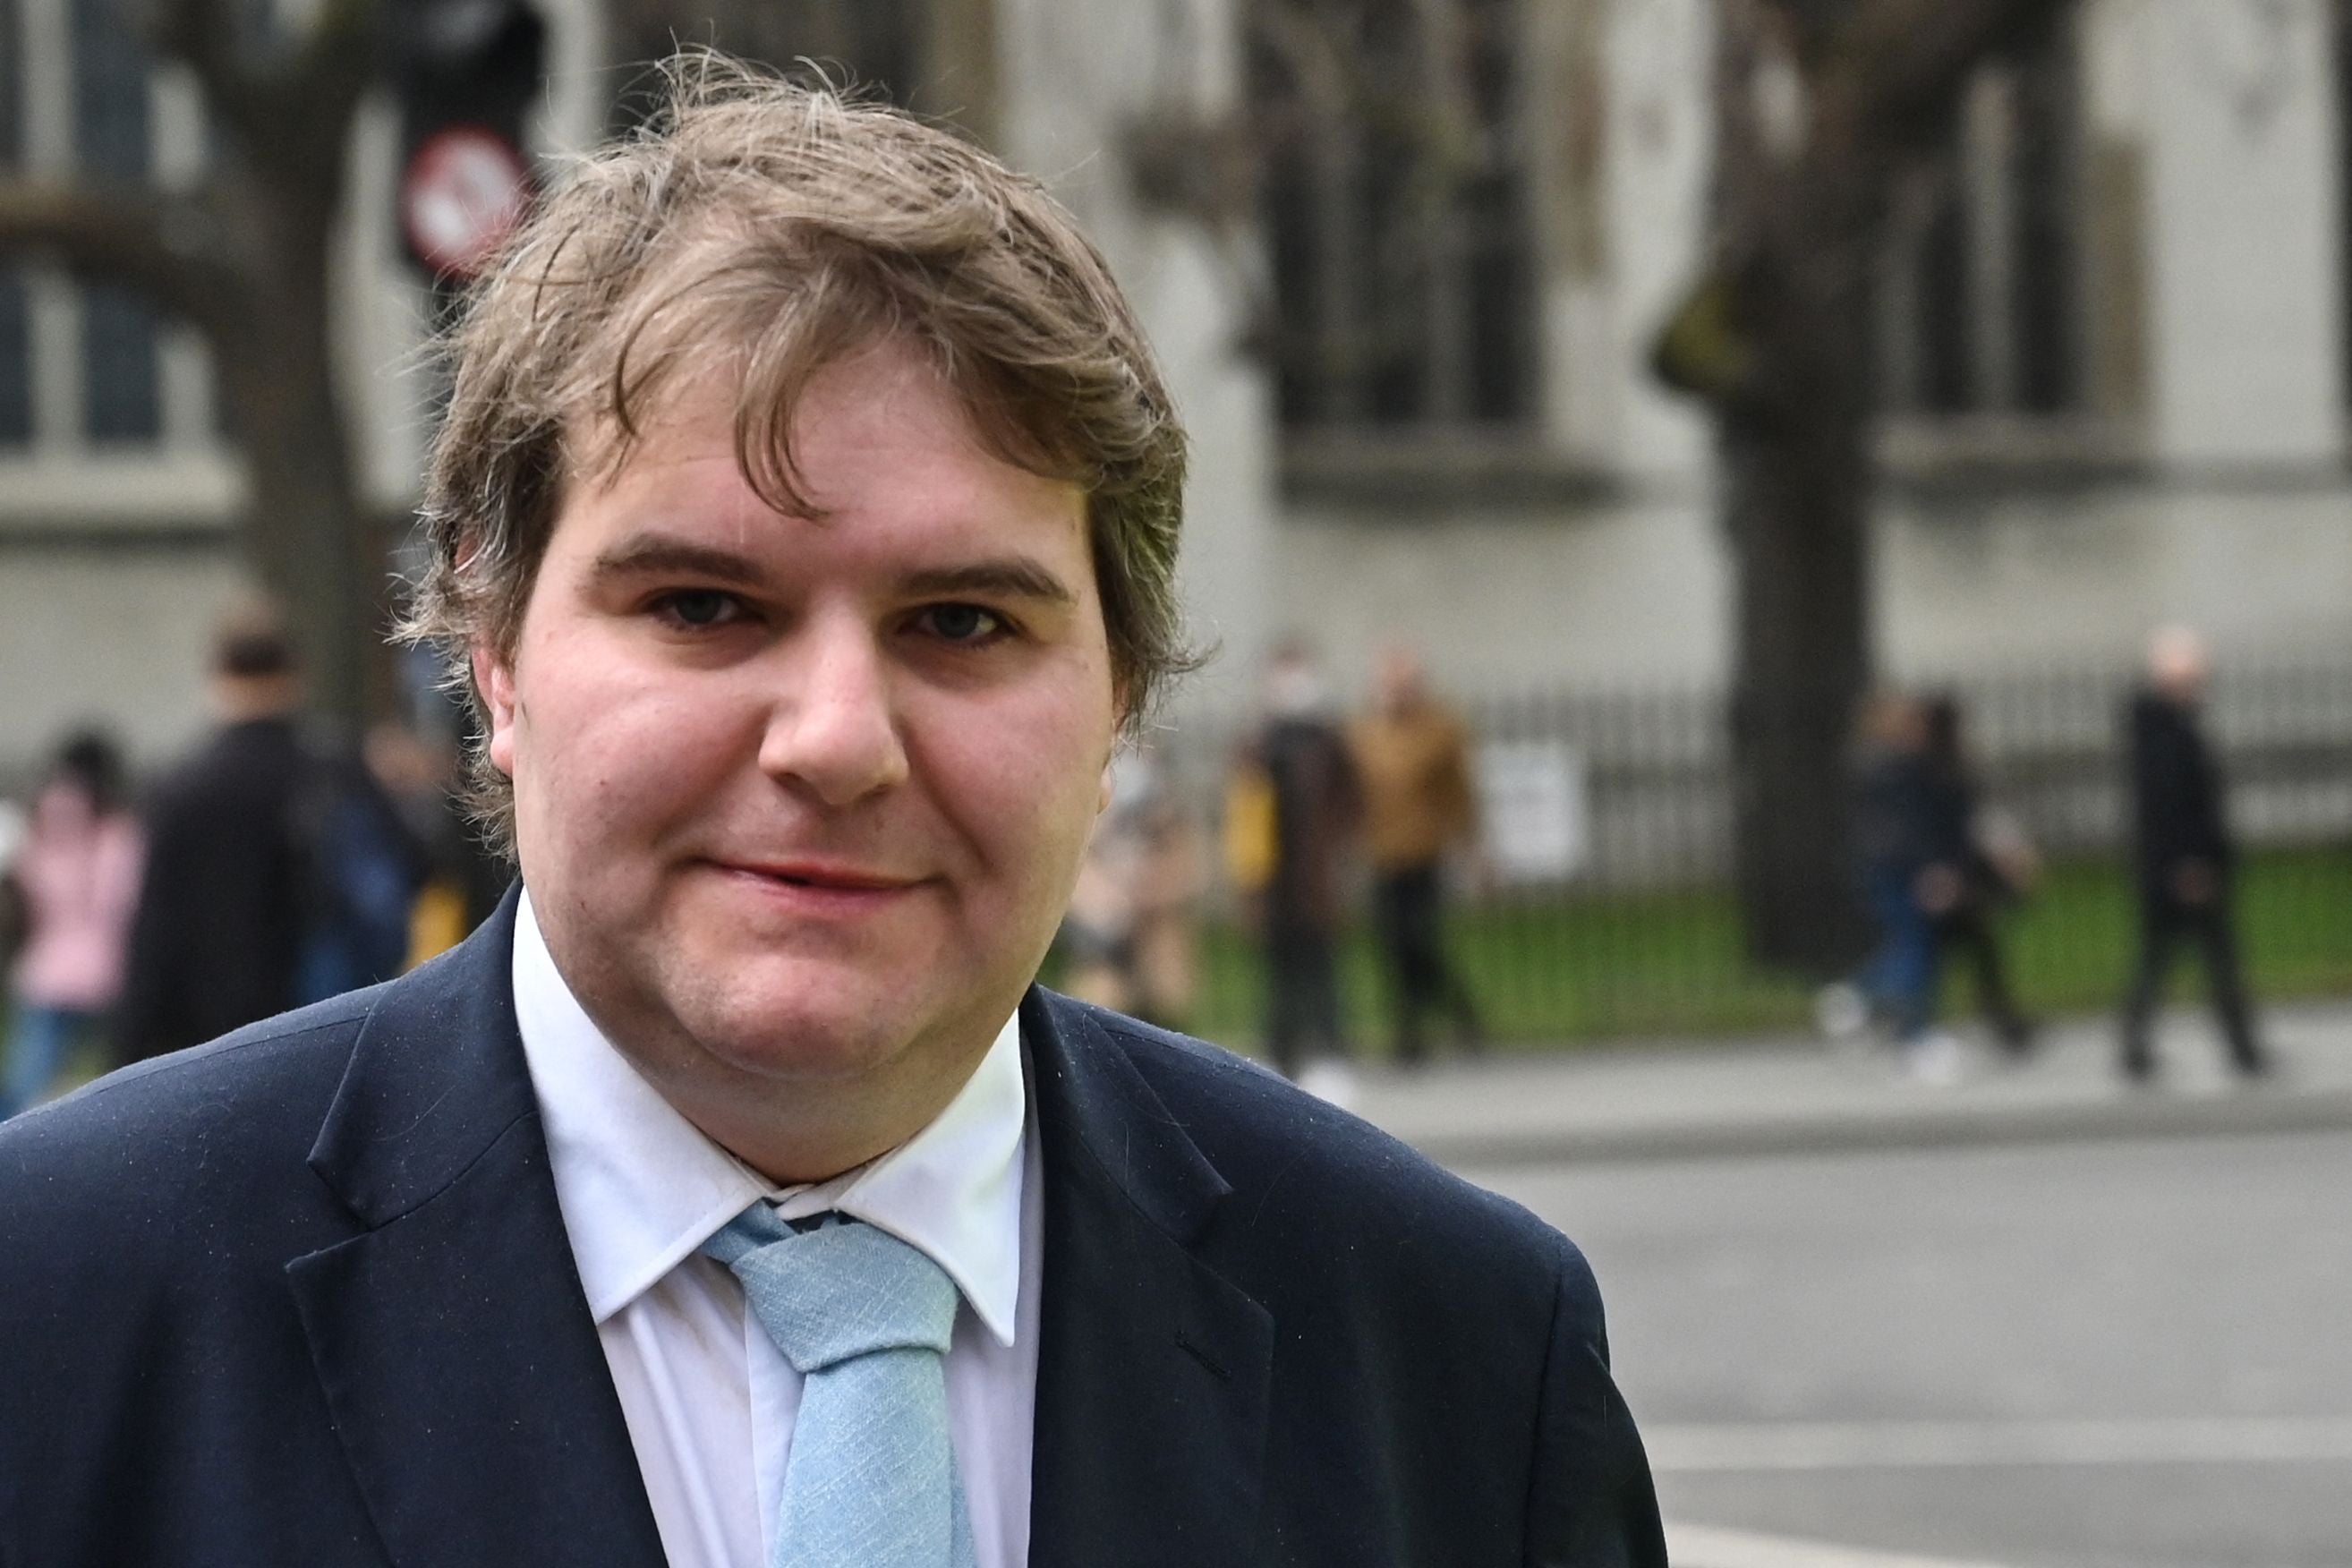 The Tory MP came out as trans on Wednesday